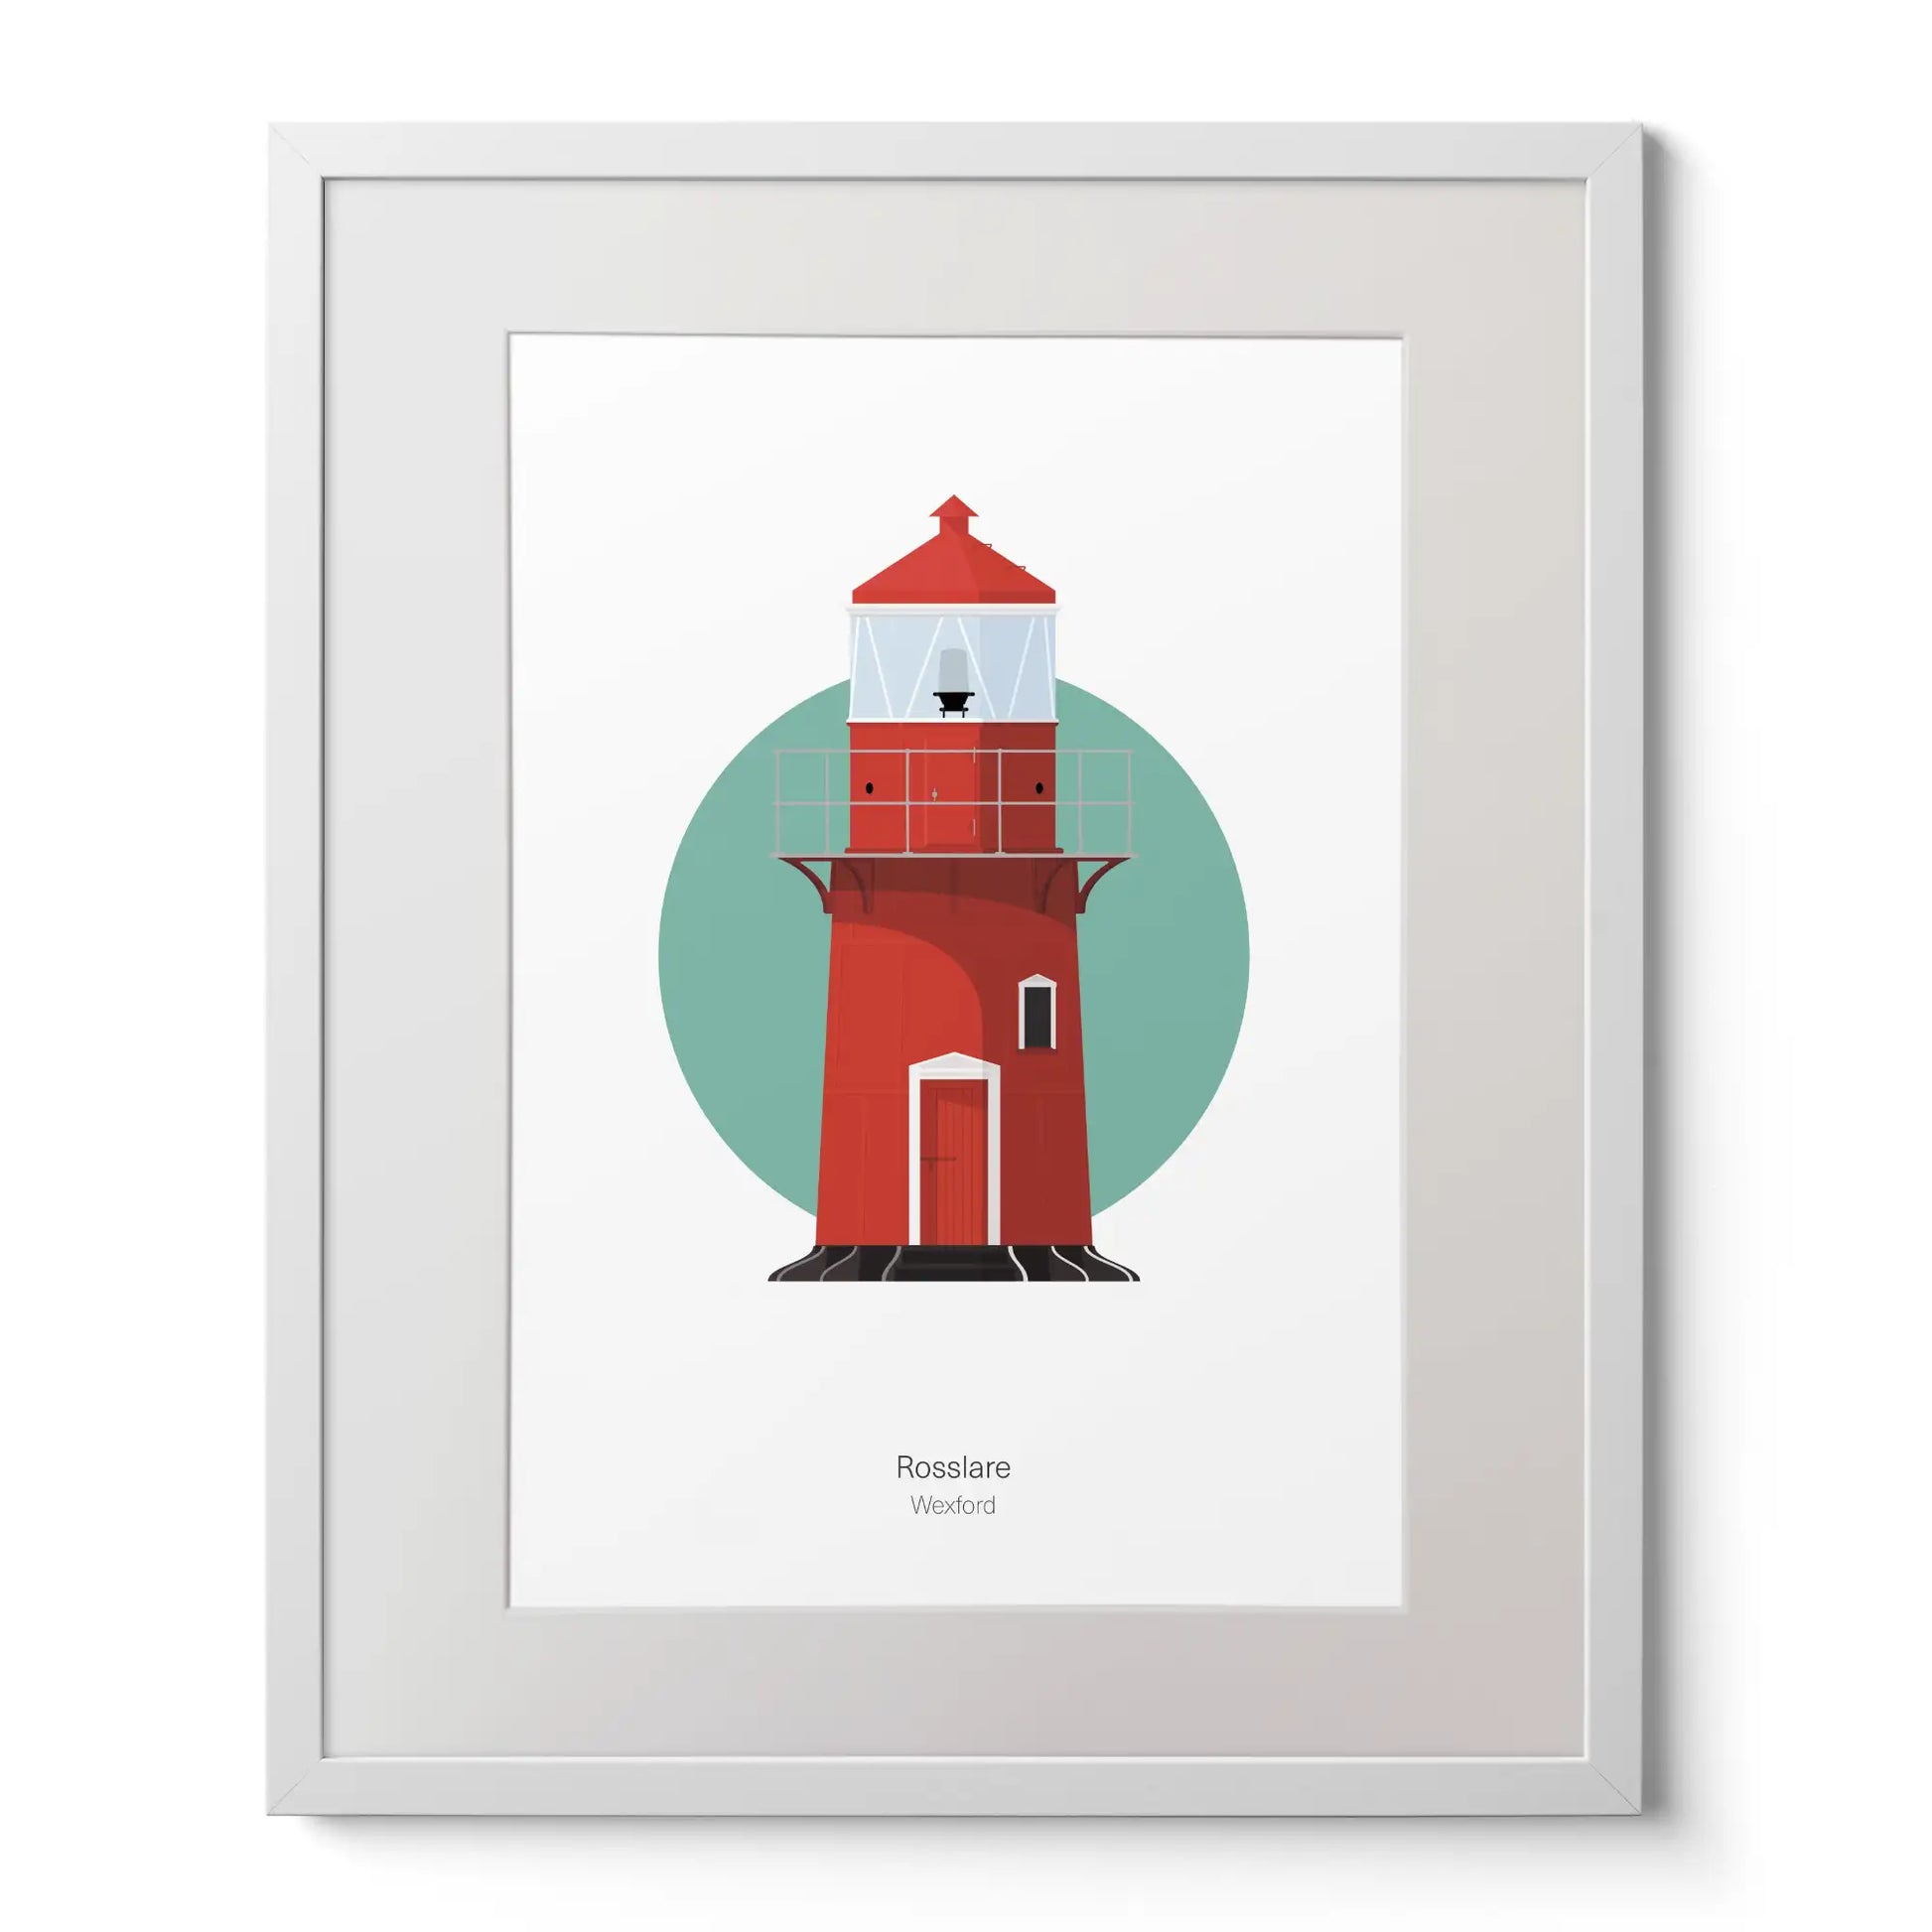 Wall hanging of Rosslare Harbour lighthouse on a white background inside light blue square,  in a white frame measuring 40x50cm.